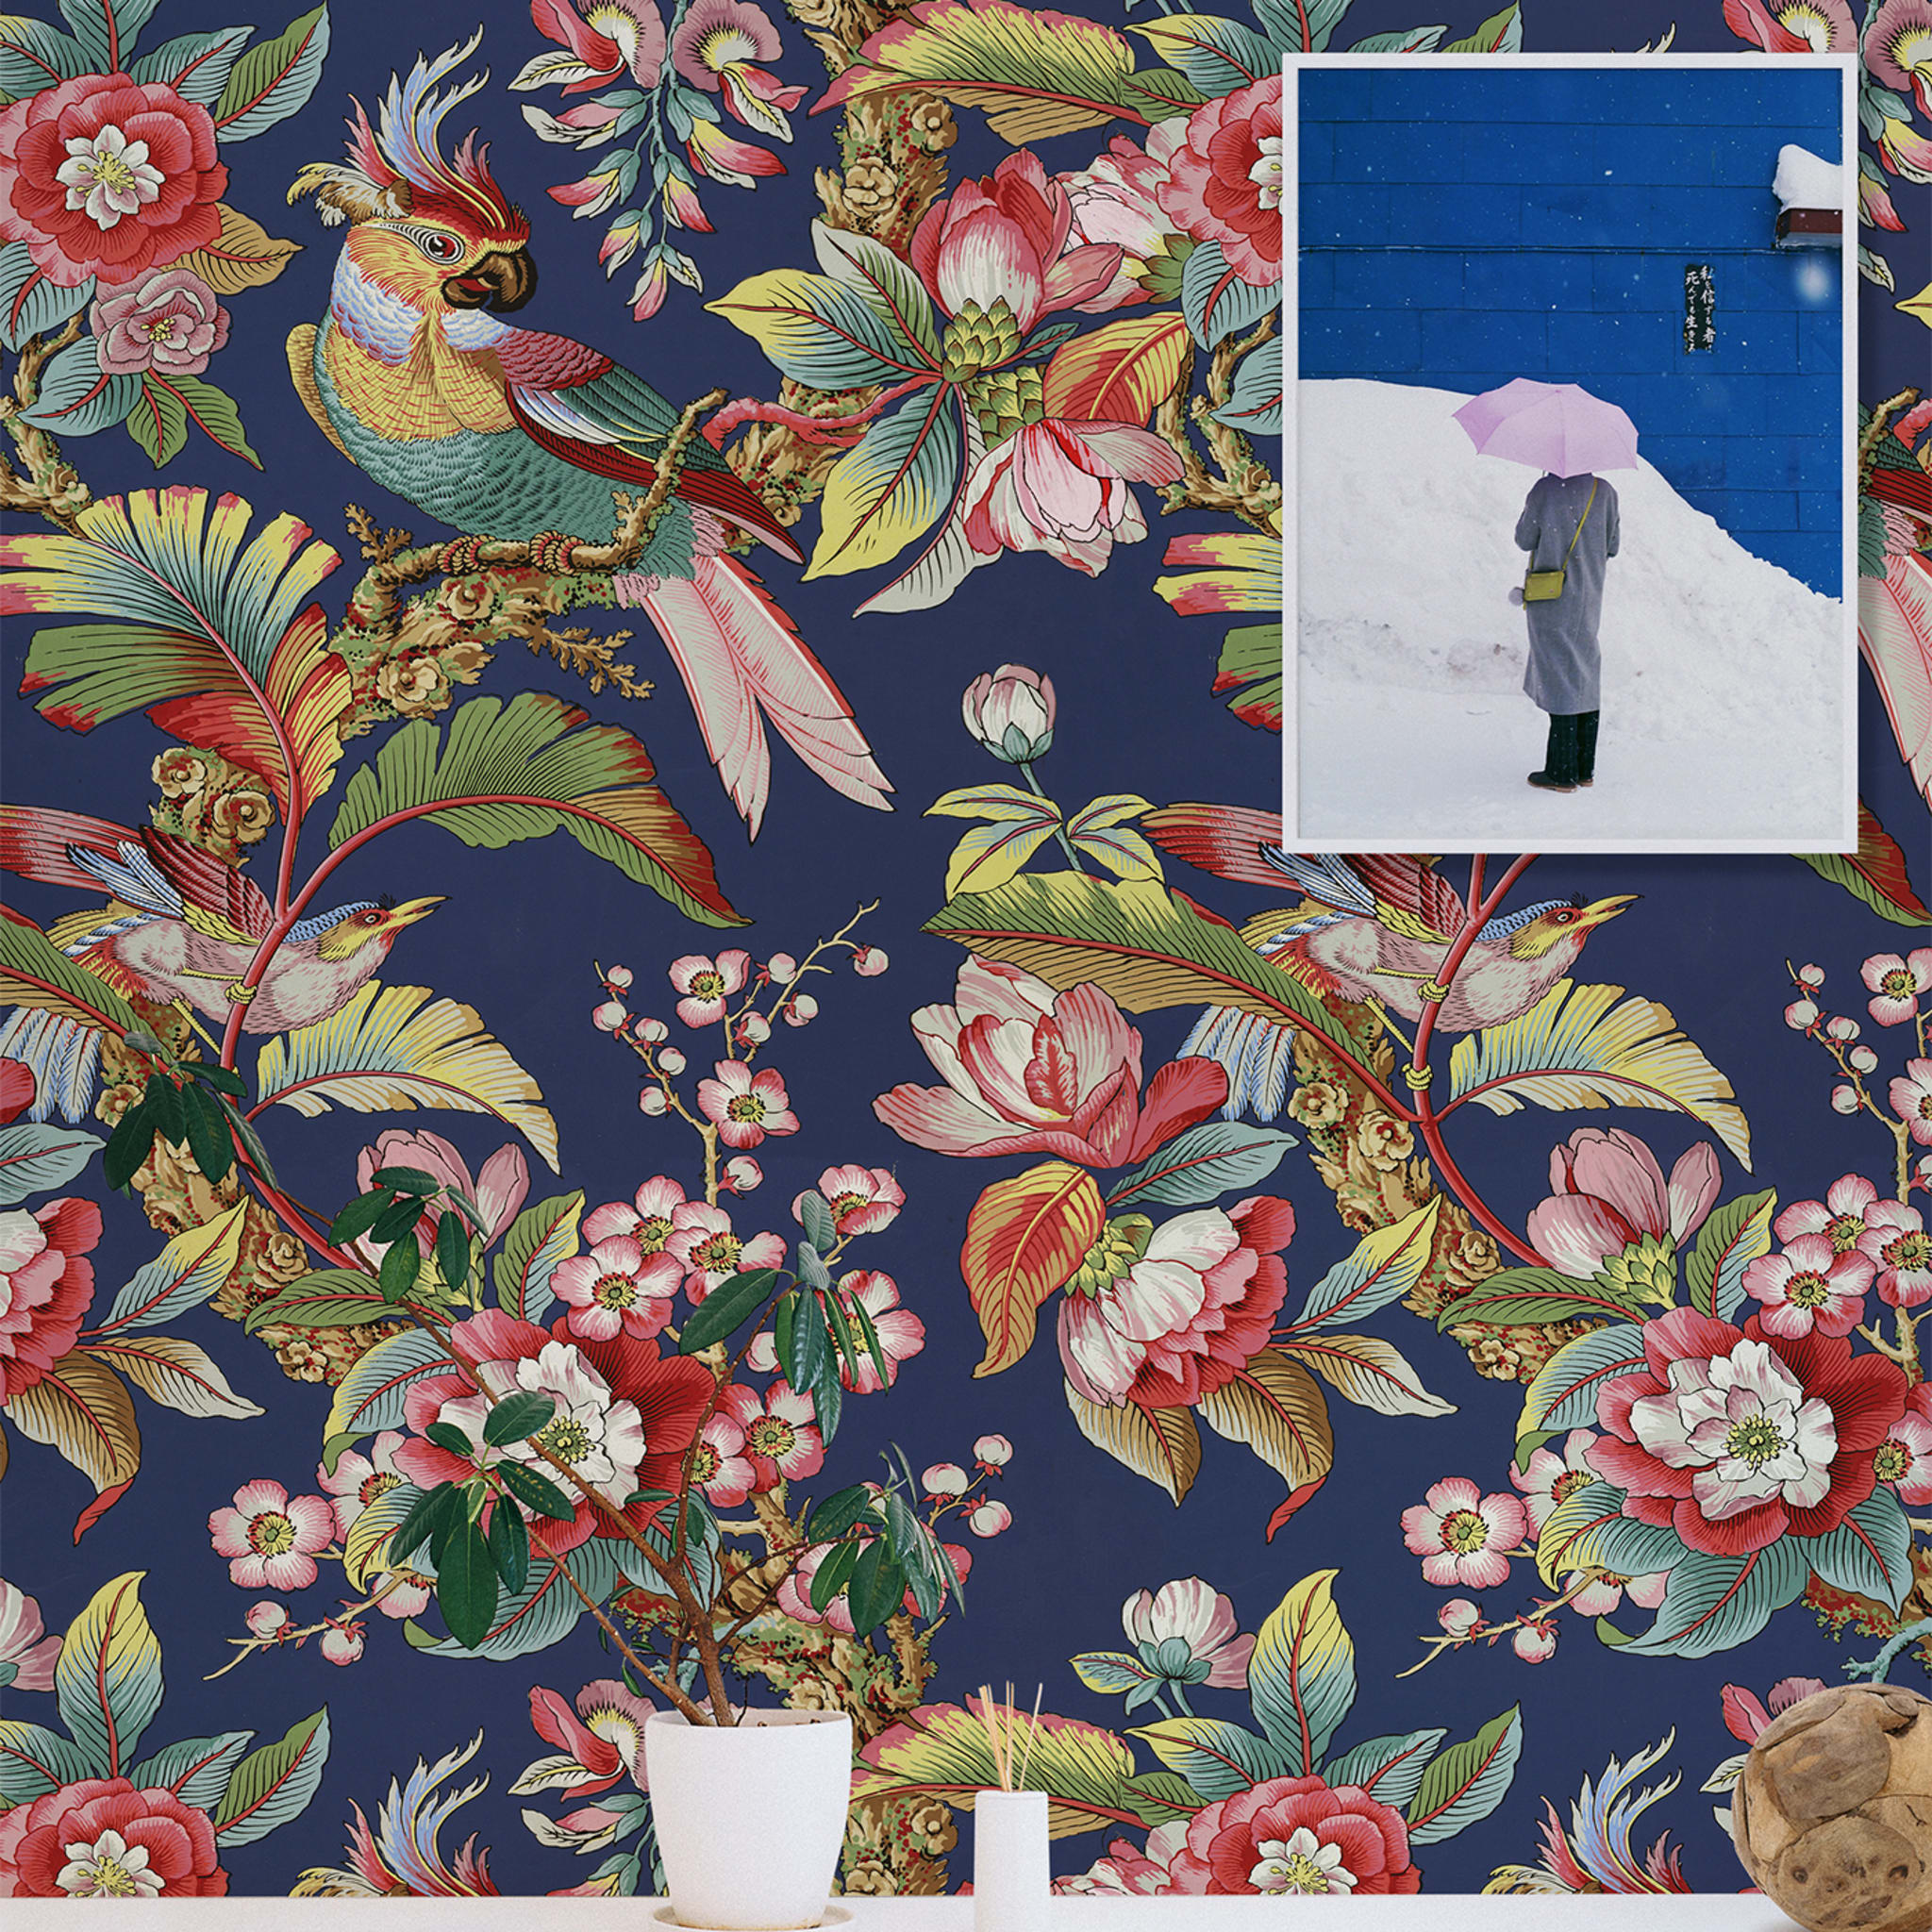 Vintage Asian Chinoiserie Wallpaper - Alternative view 1